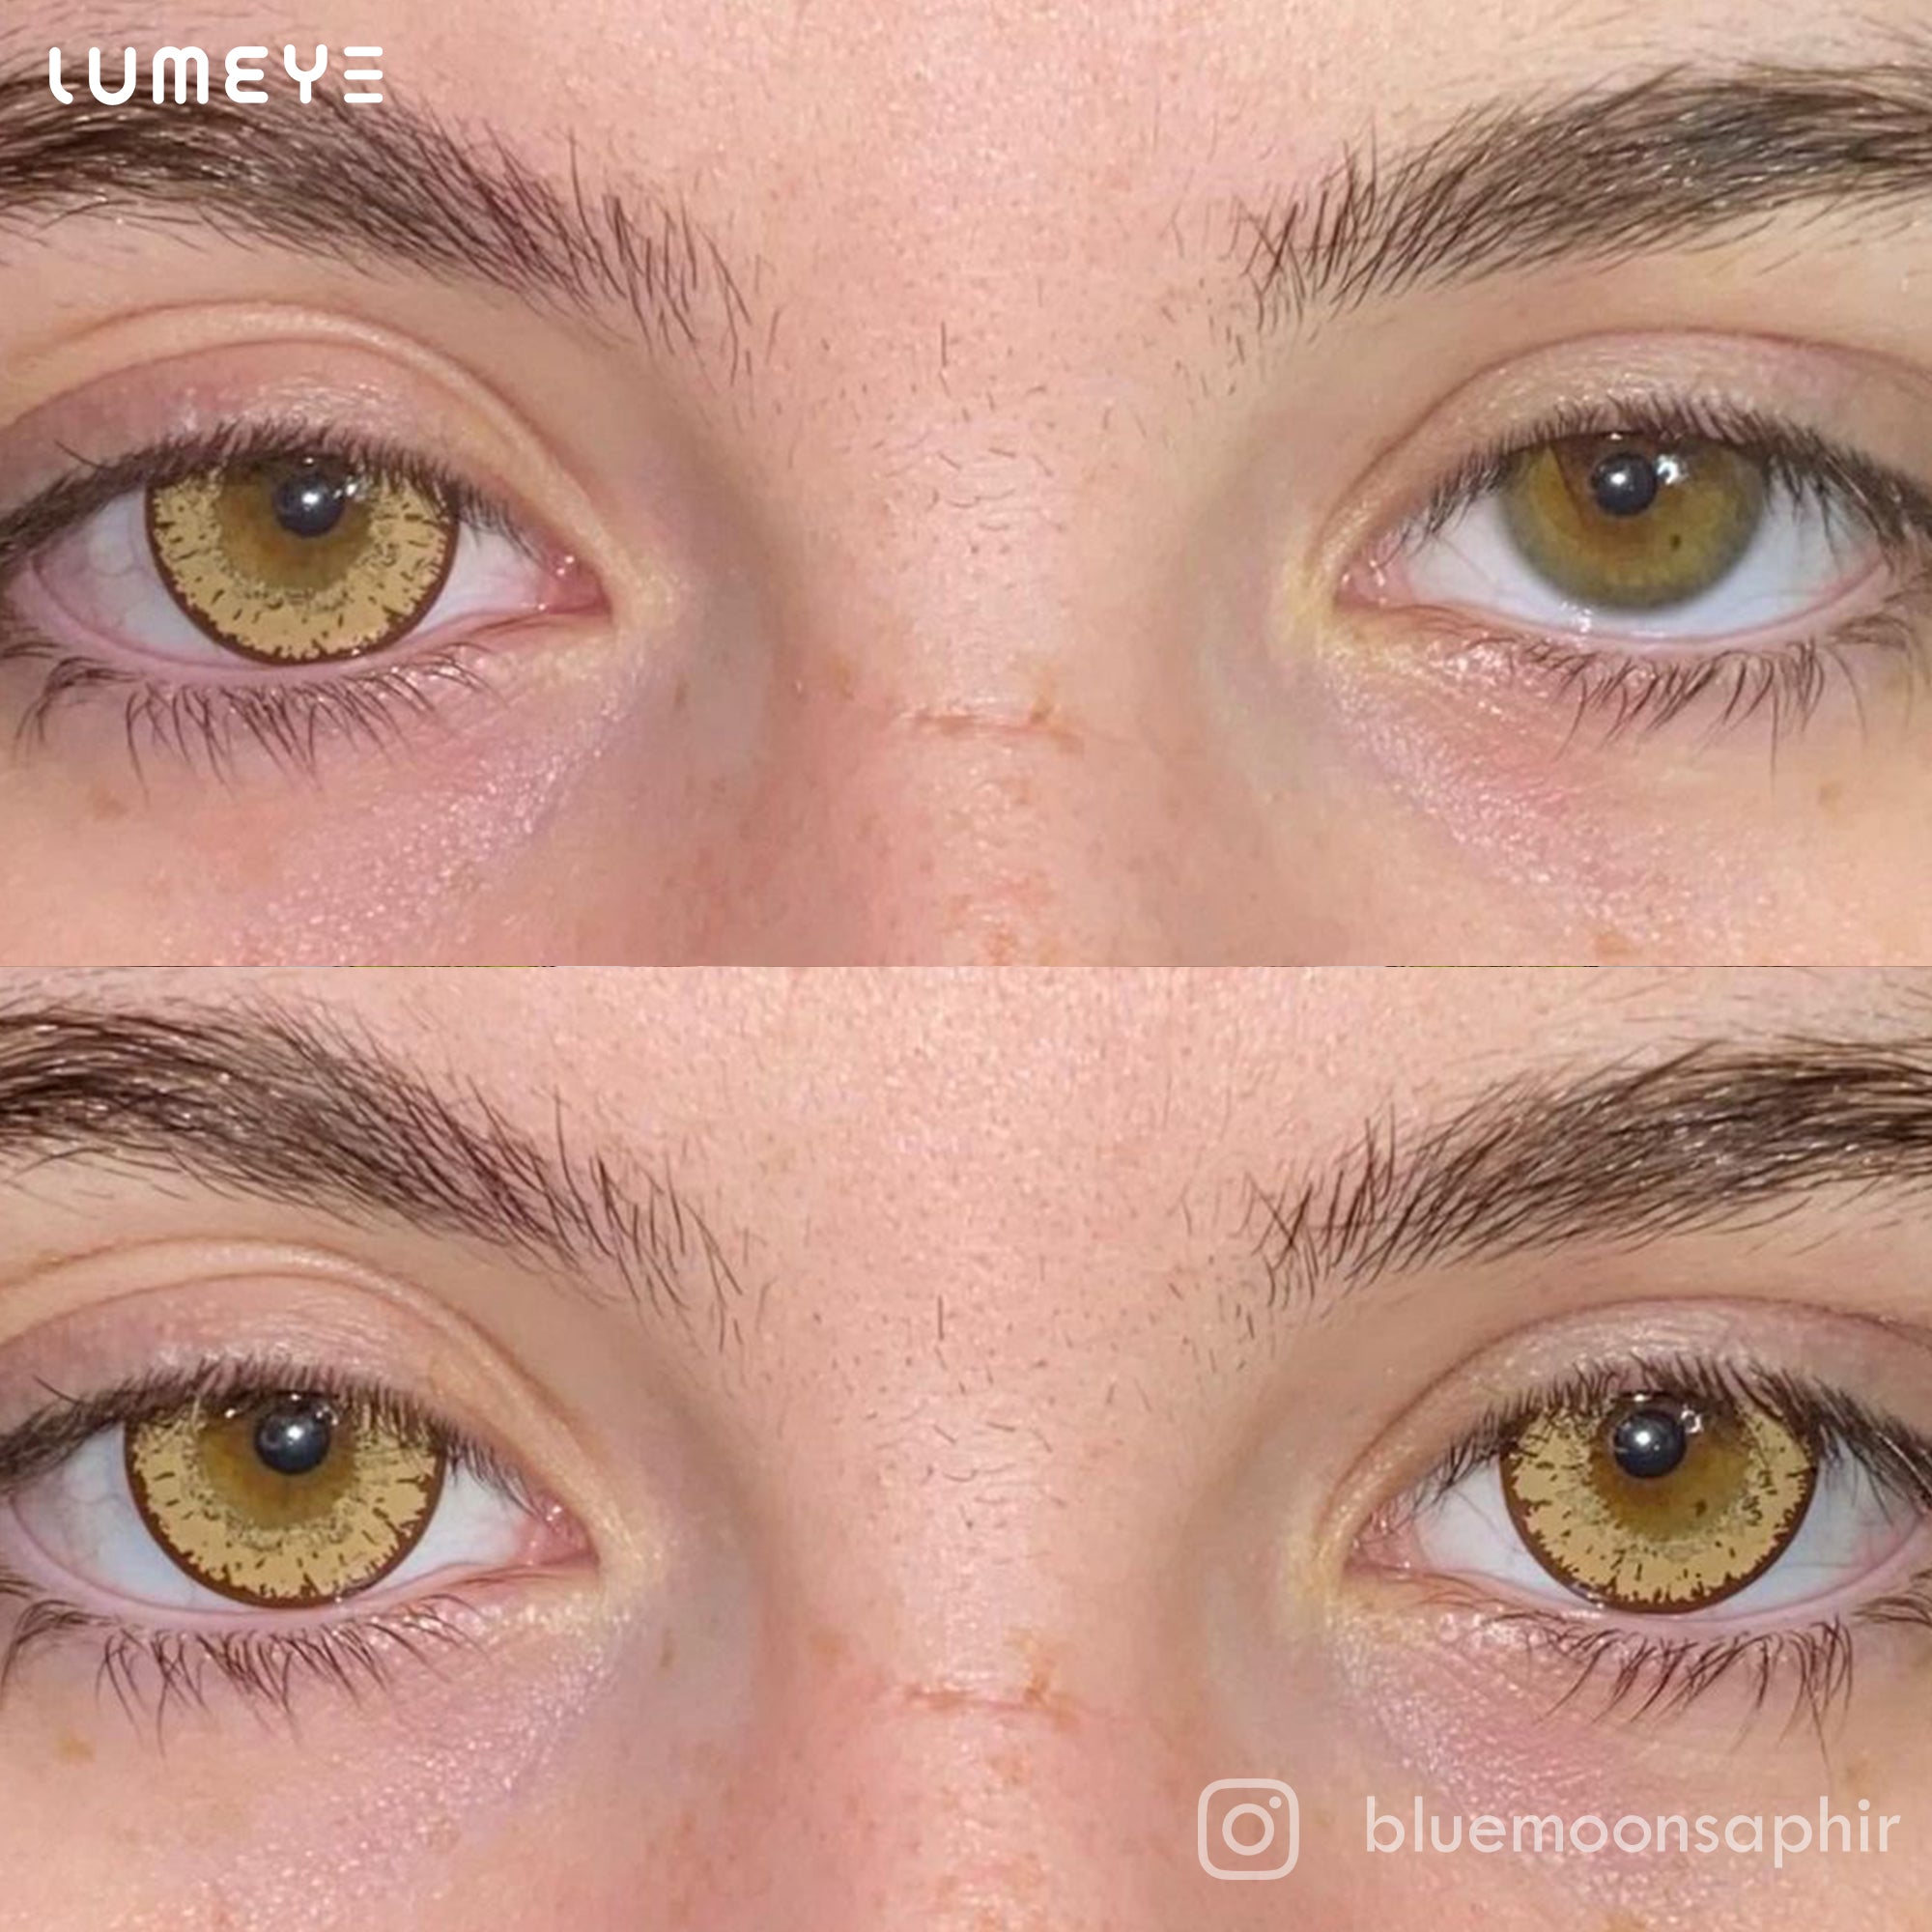 Best COLORED CONTACTS - LUMEYE Candy Peanut Butter Brown Colored Contact Lenses - LUMEYE